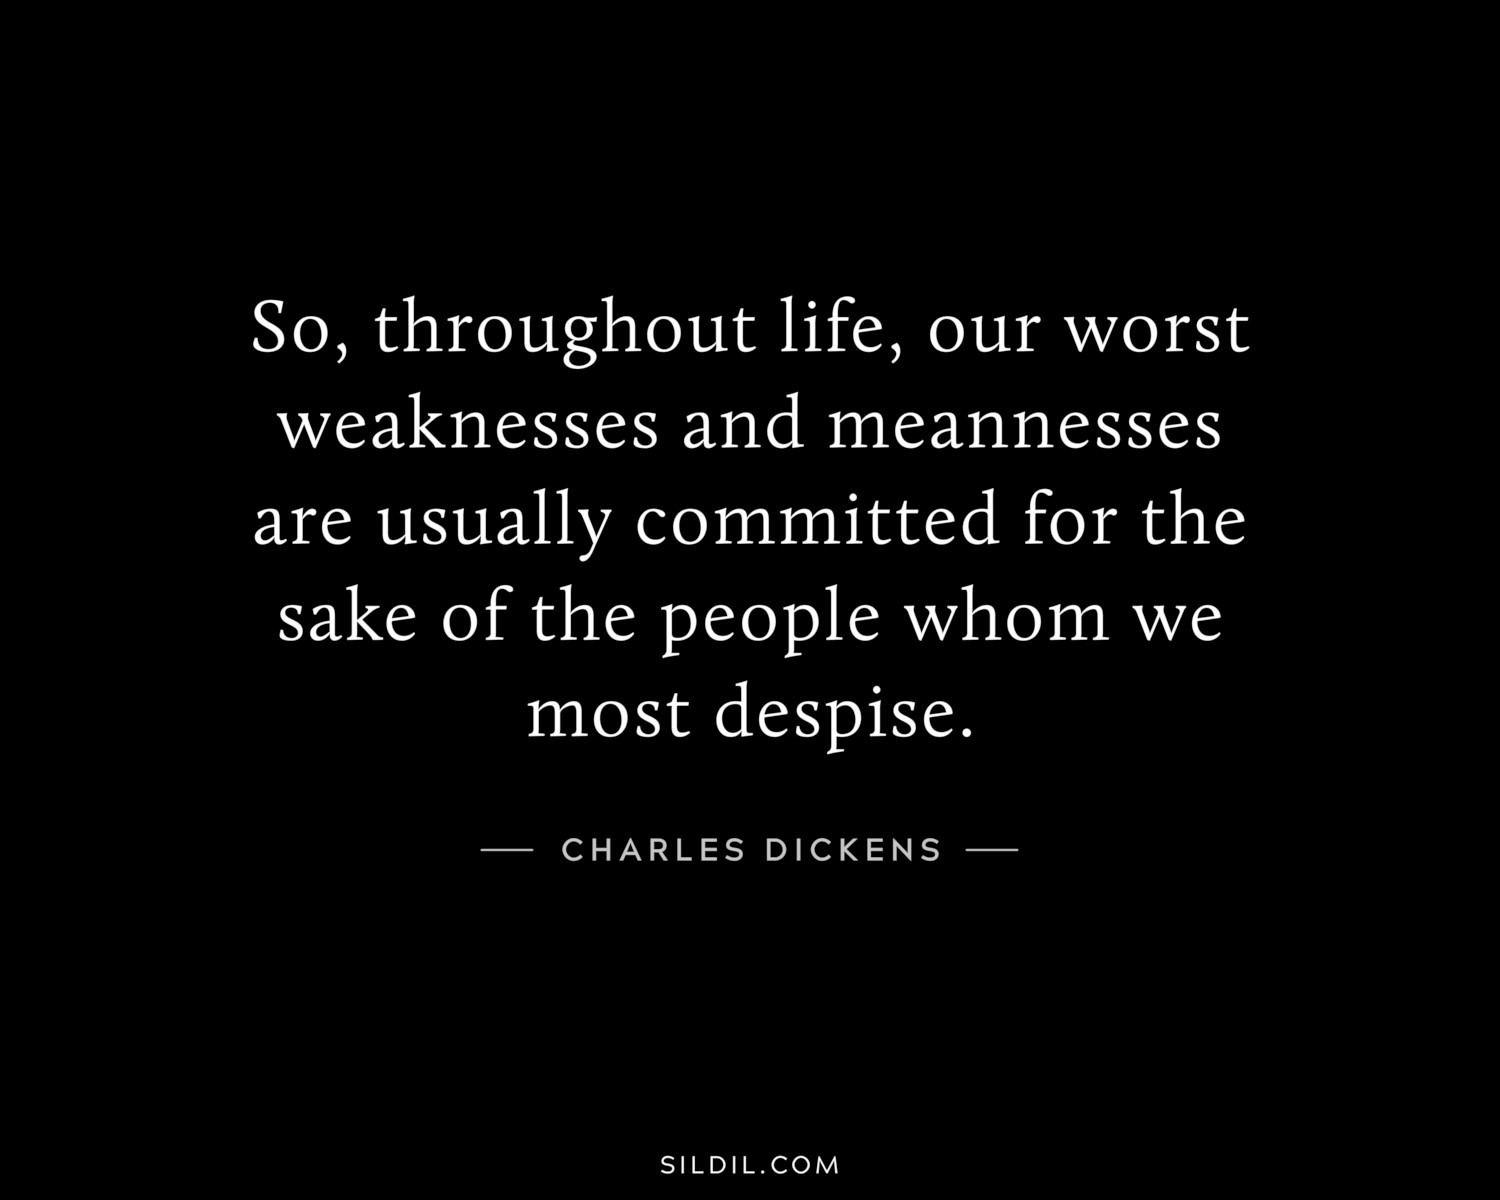 So, throughout life, our worst weaknesses and meannesses are usually committed for the sake of the people whom we most despise.